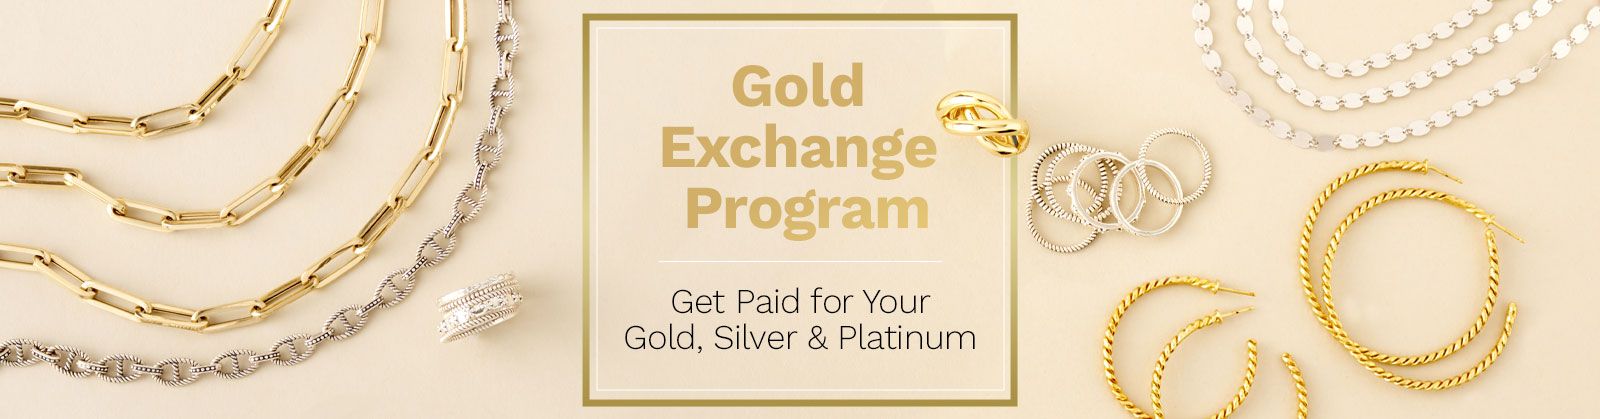 Introducing the ShopHQ Gold Exchange Program  Simple & Secure Get Paid for Your Gold, Silver & Platinum